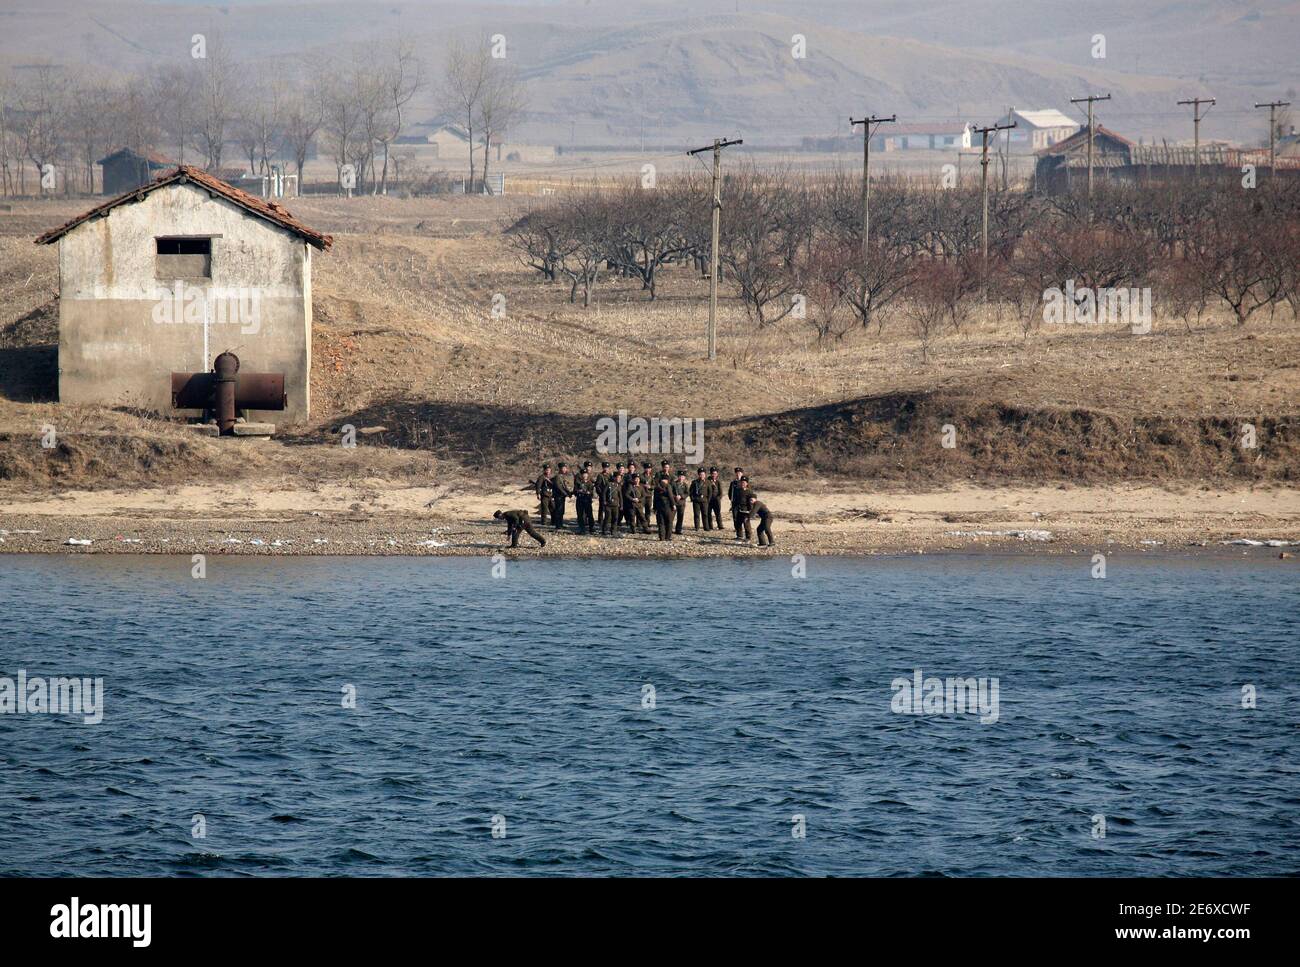 North Korean soldiers play with stones while guarding the banks of Yalu River near the North Korean town of Sinuiju, opposite the Chinese border city of Dandong, March 10, 2010. China has acquired a 10-year lease of Rajin port on North Korea's east coast, potentially increasing shipping access to the Sea of Japan, a provincial official said during China's annual legislative meeting. REUTERS/Jacky Chen (NORTH KOREA - Tags: MILITARY BUSINESS POLITICS) Stock Photo